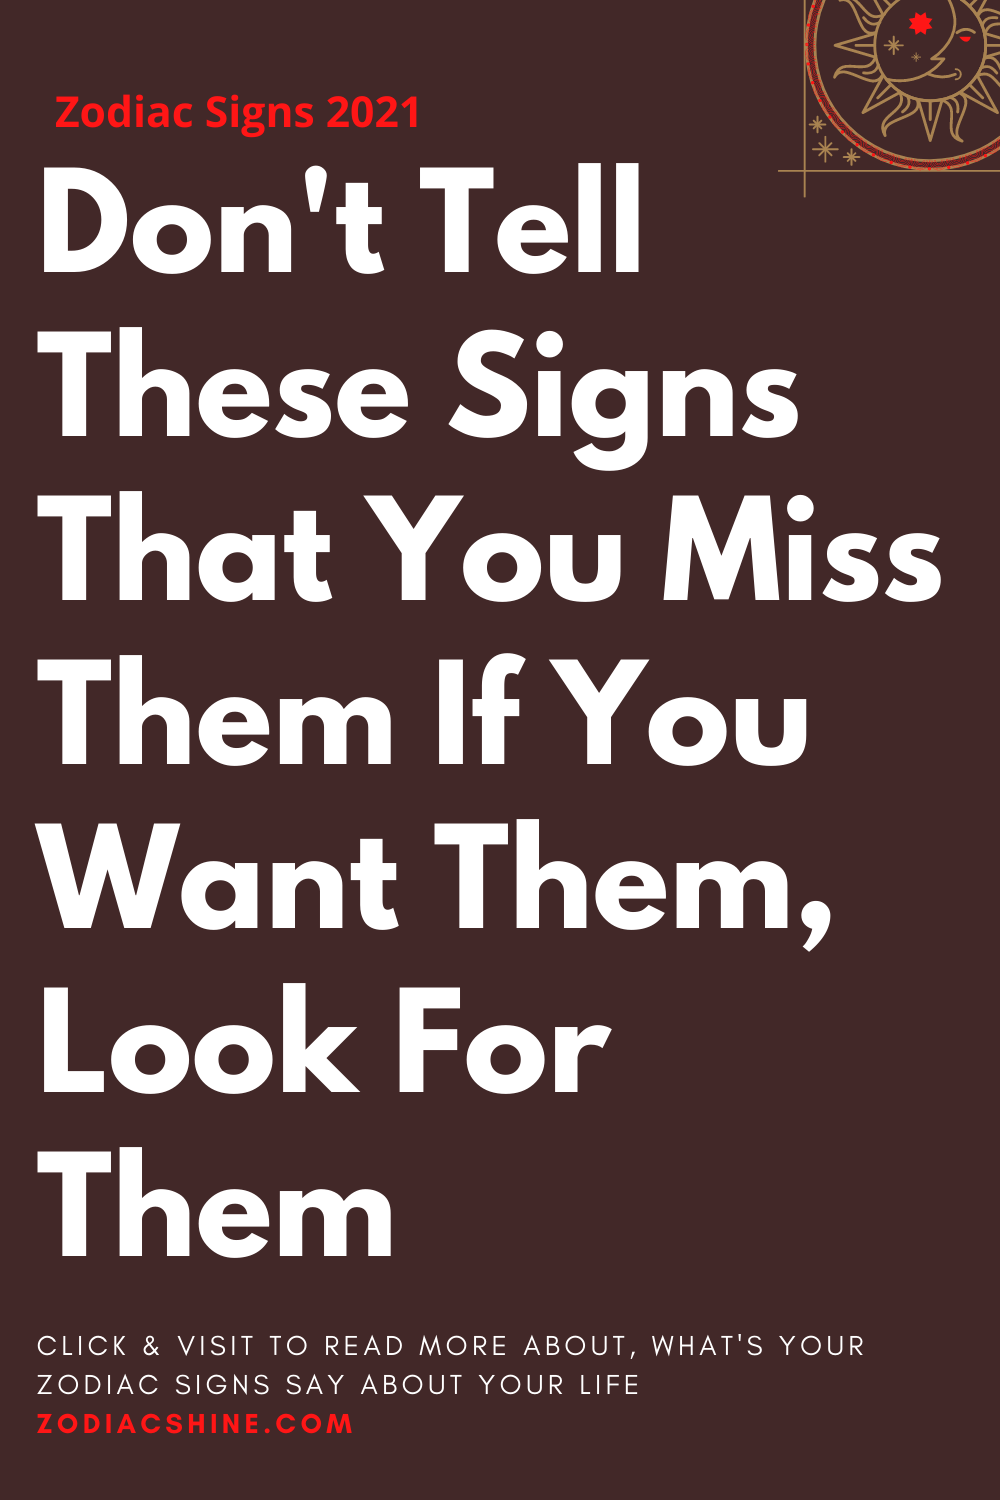 Don't Tell These Signs That You Miss Them If You Want Them Look For Them